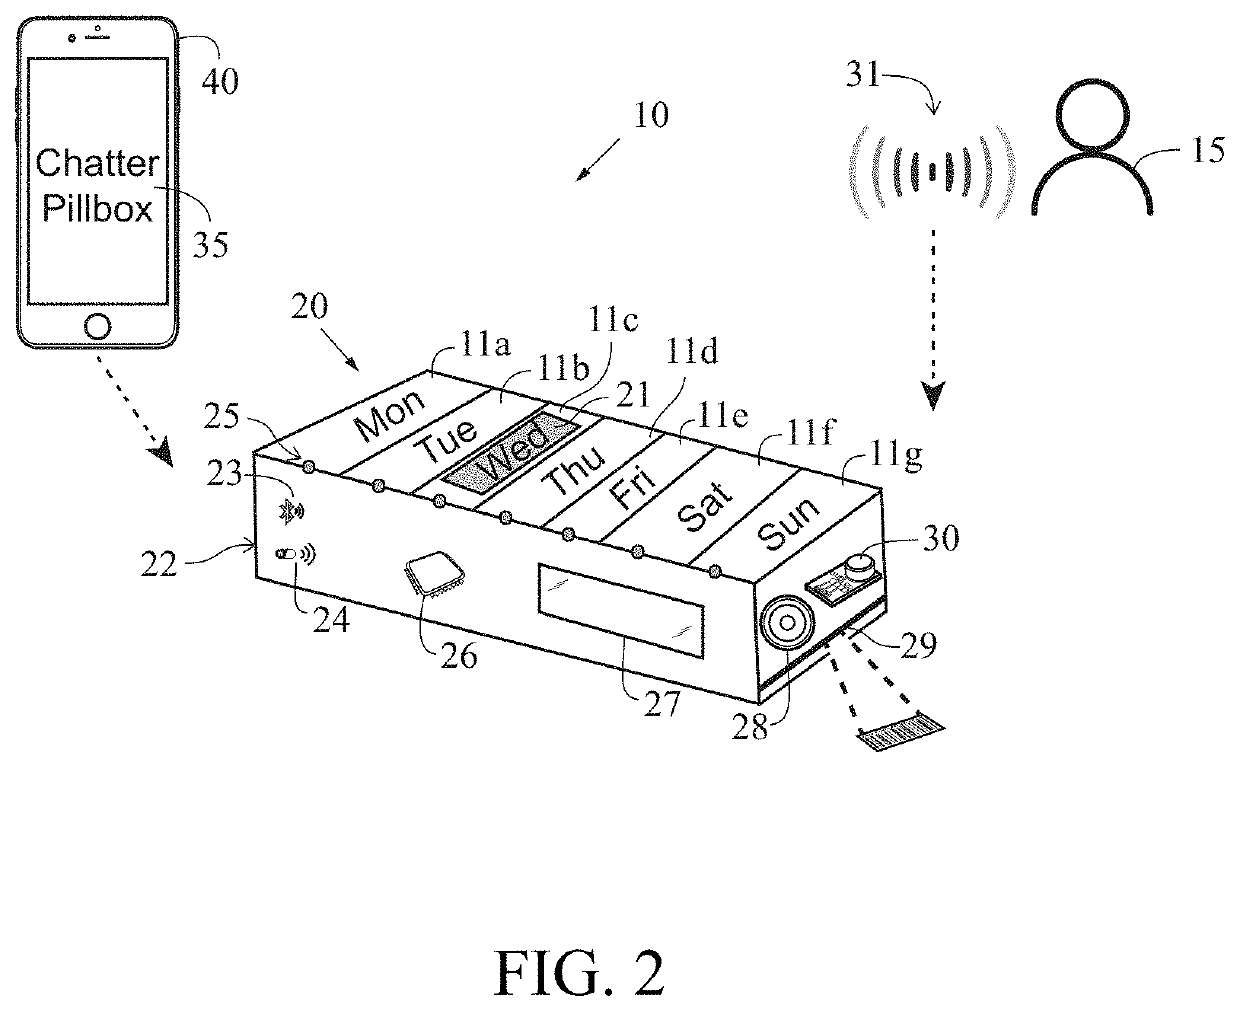 Pill Organization Utilizing A Voice-Based Virtual Assistant